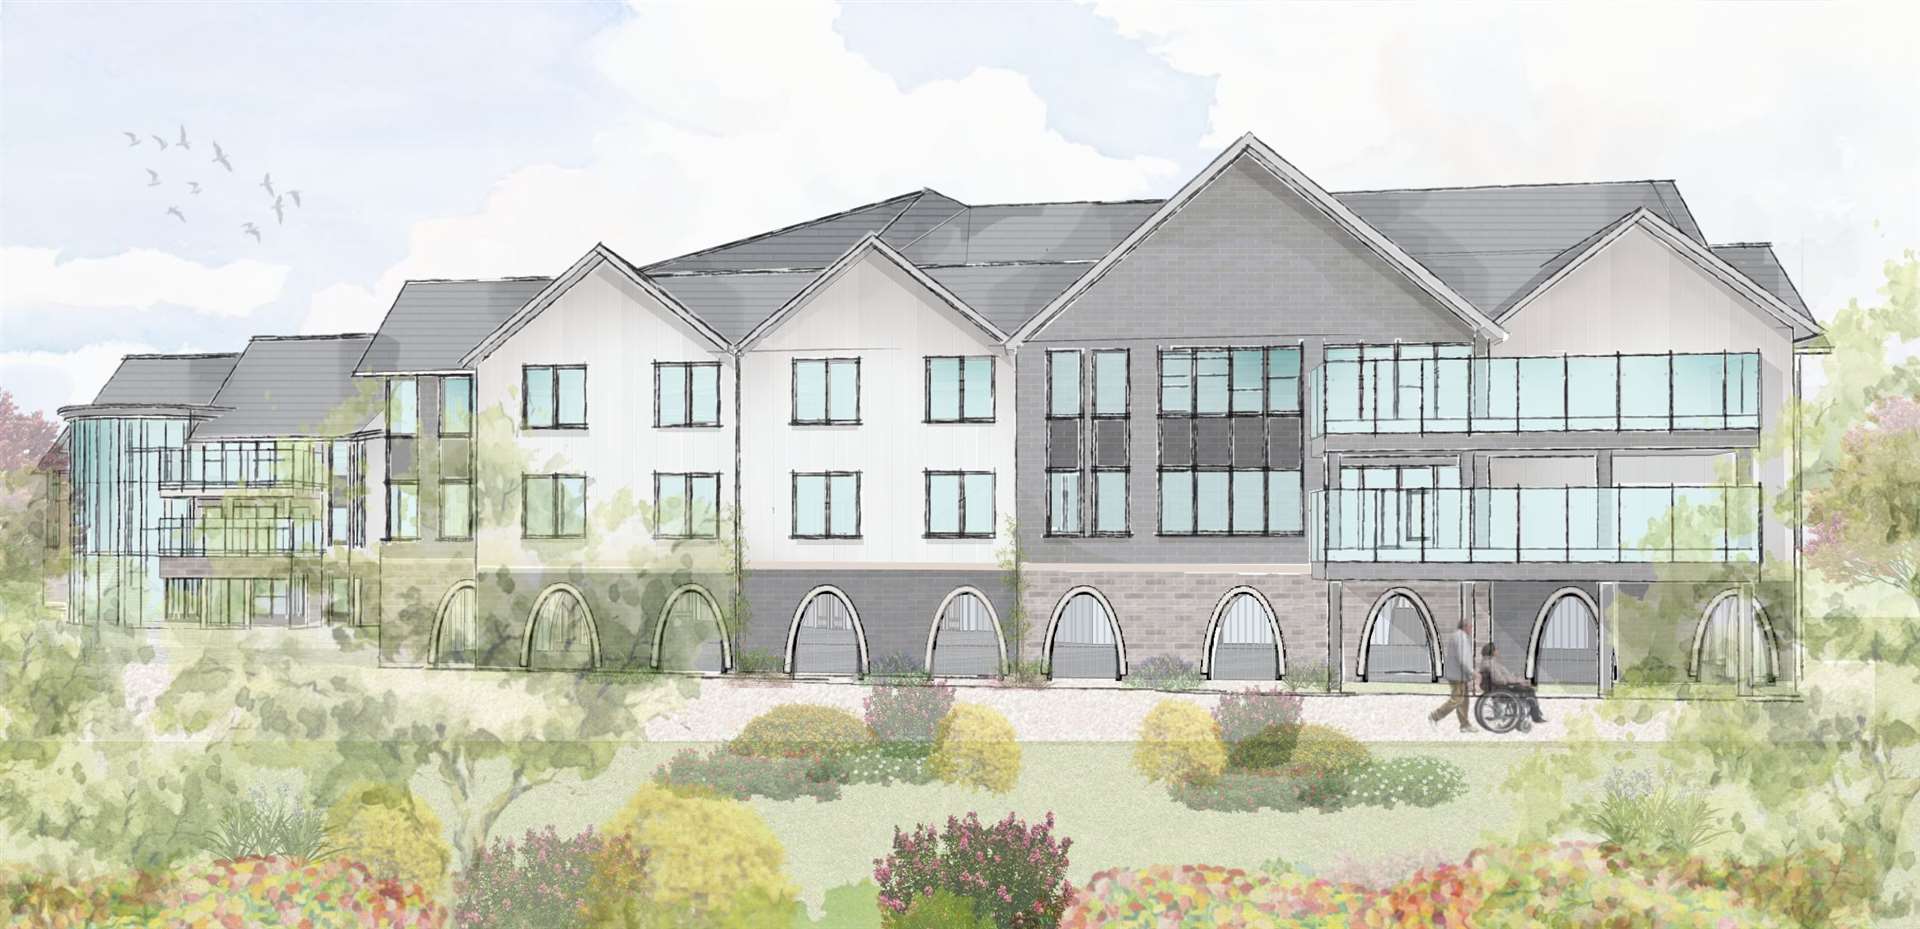 An artist's impression of the proposed Dewmist Care Home